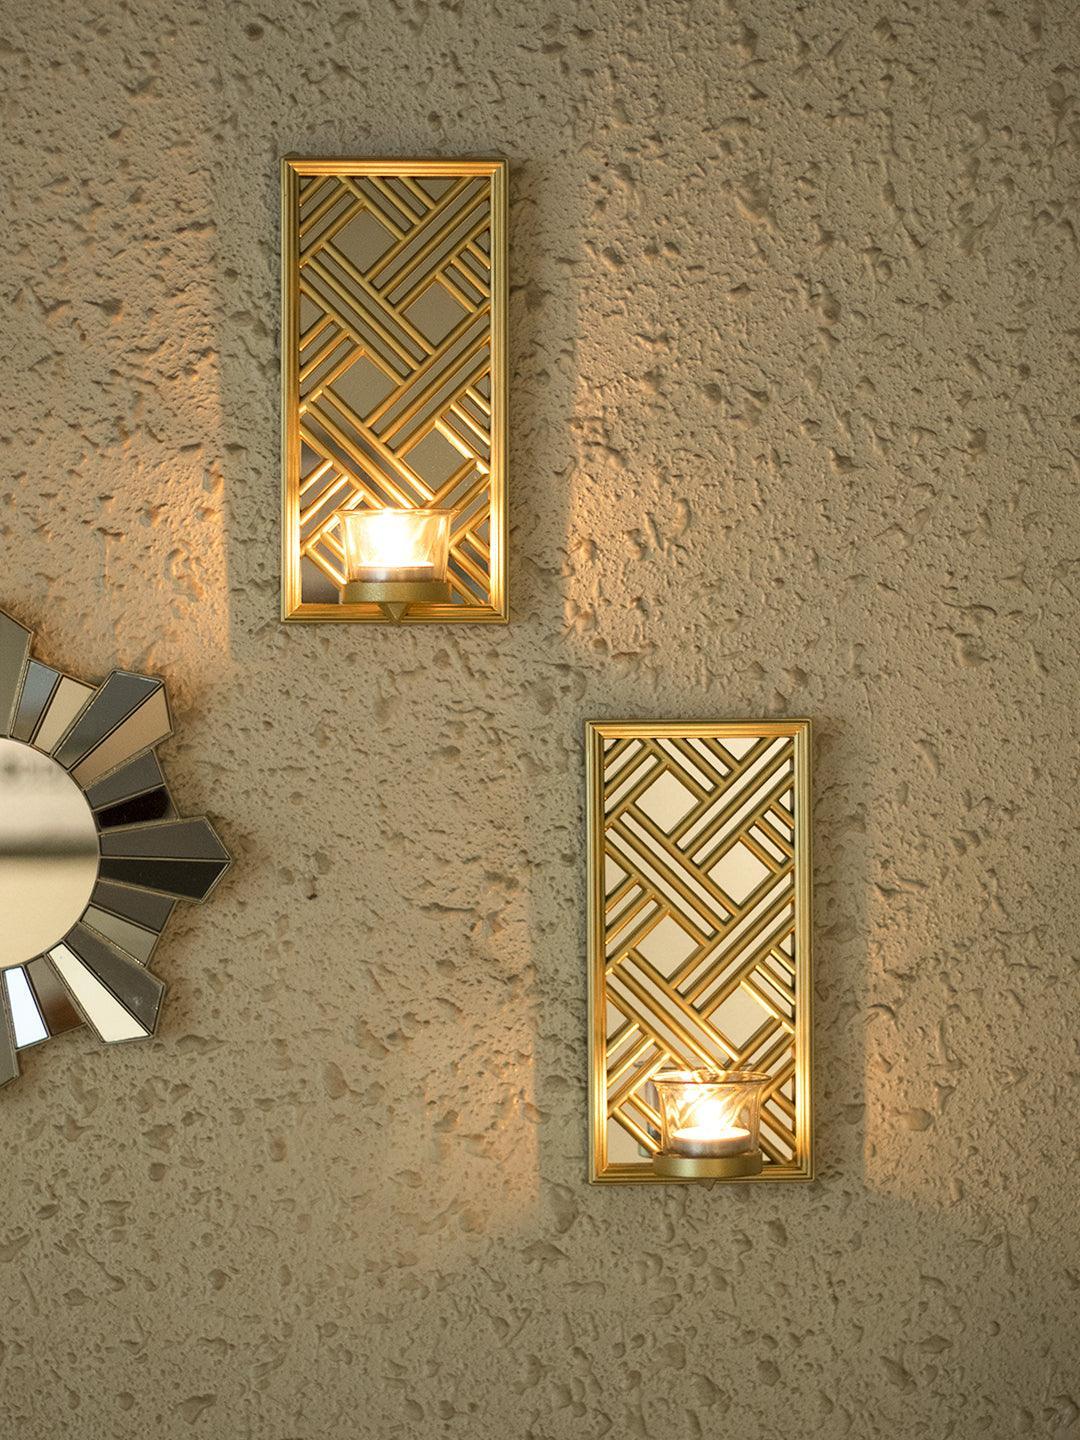 Decorative Indoor Wall Sconce Candle Holders - MARKET 99